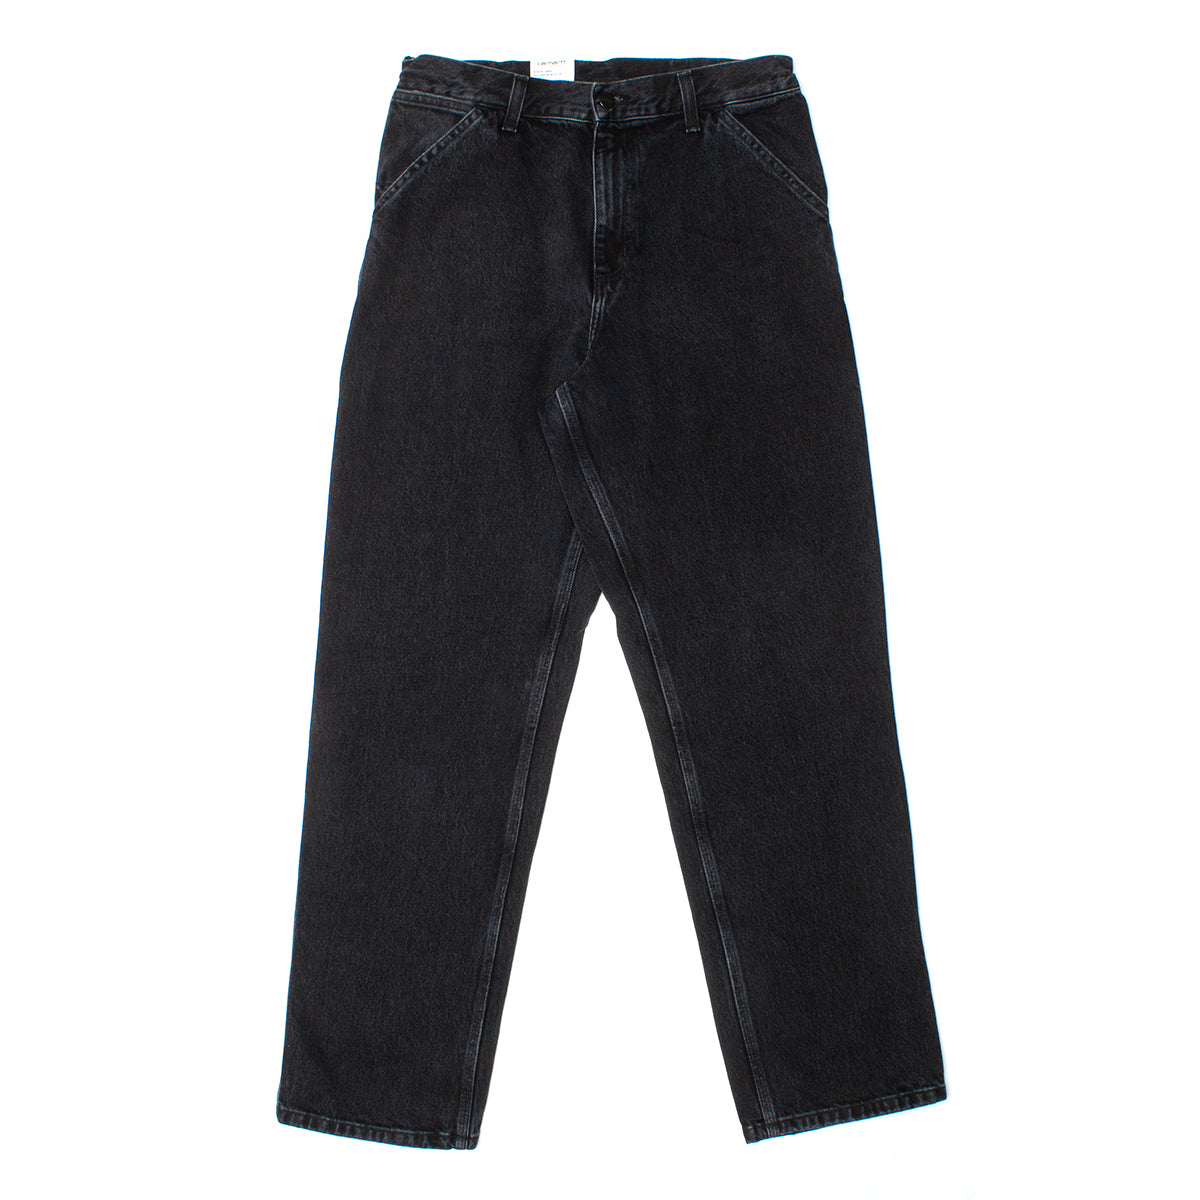 Carhartt WIP | Single Knee Pant Style # I032024-8906 Color : Black (Stone Washed)